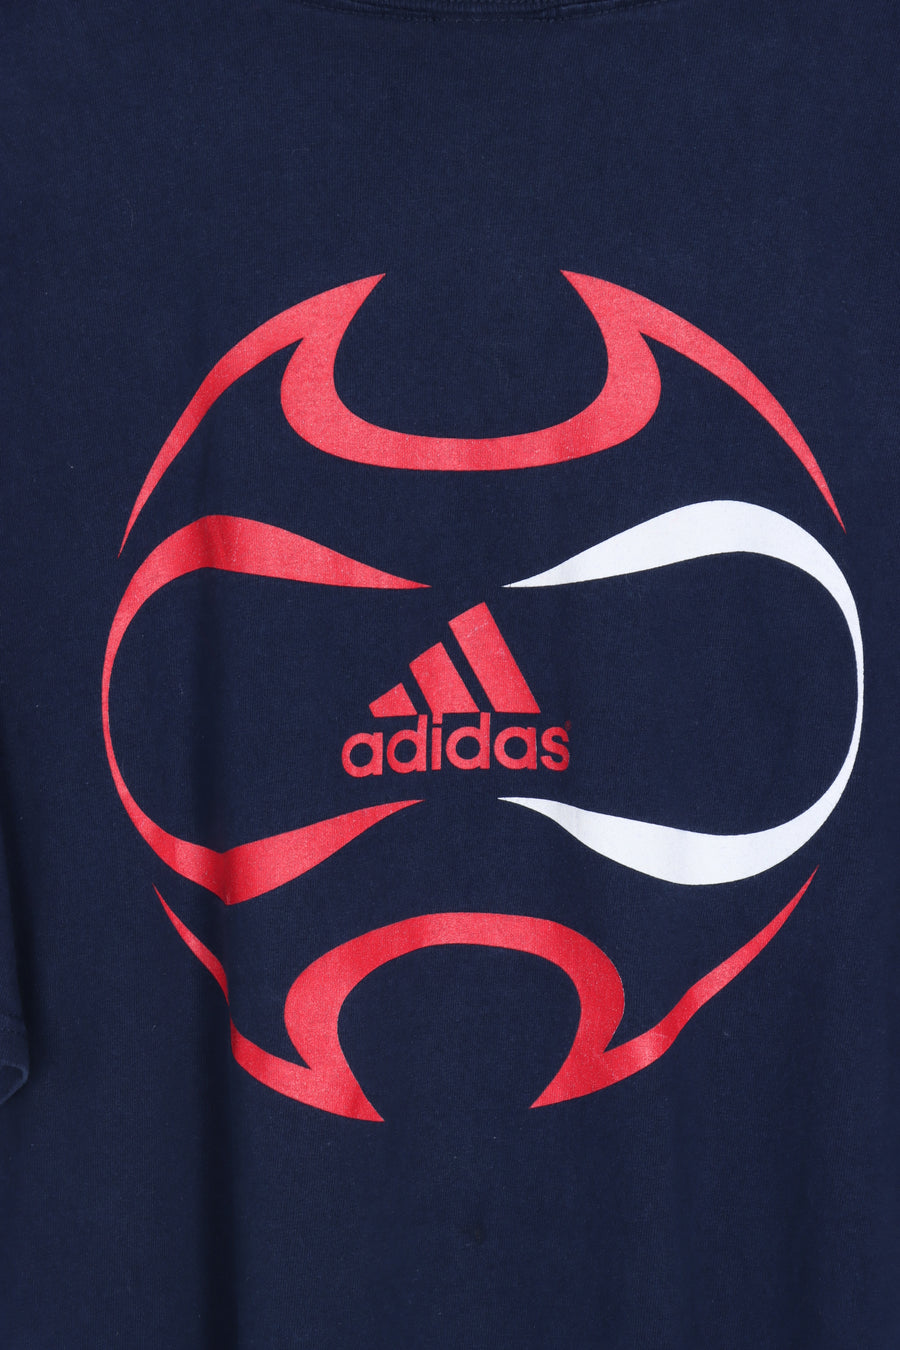 ADIDAS x Red Bull Red & Navy Soccer Promo Tee (XL)